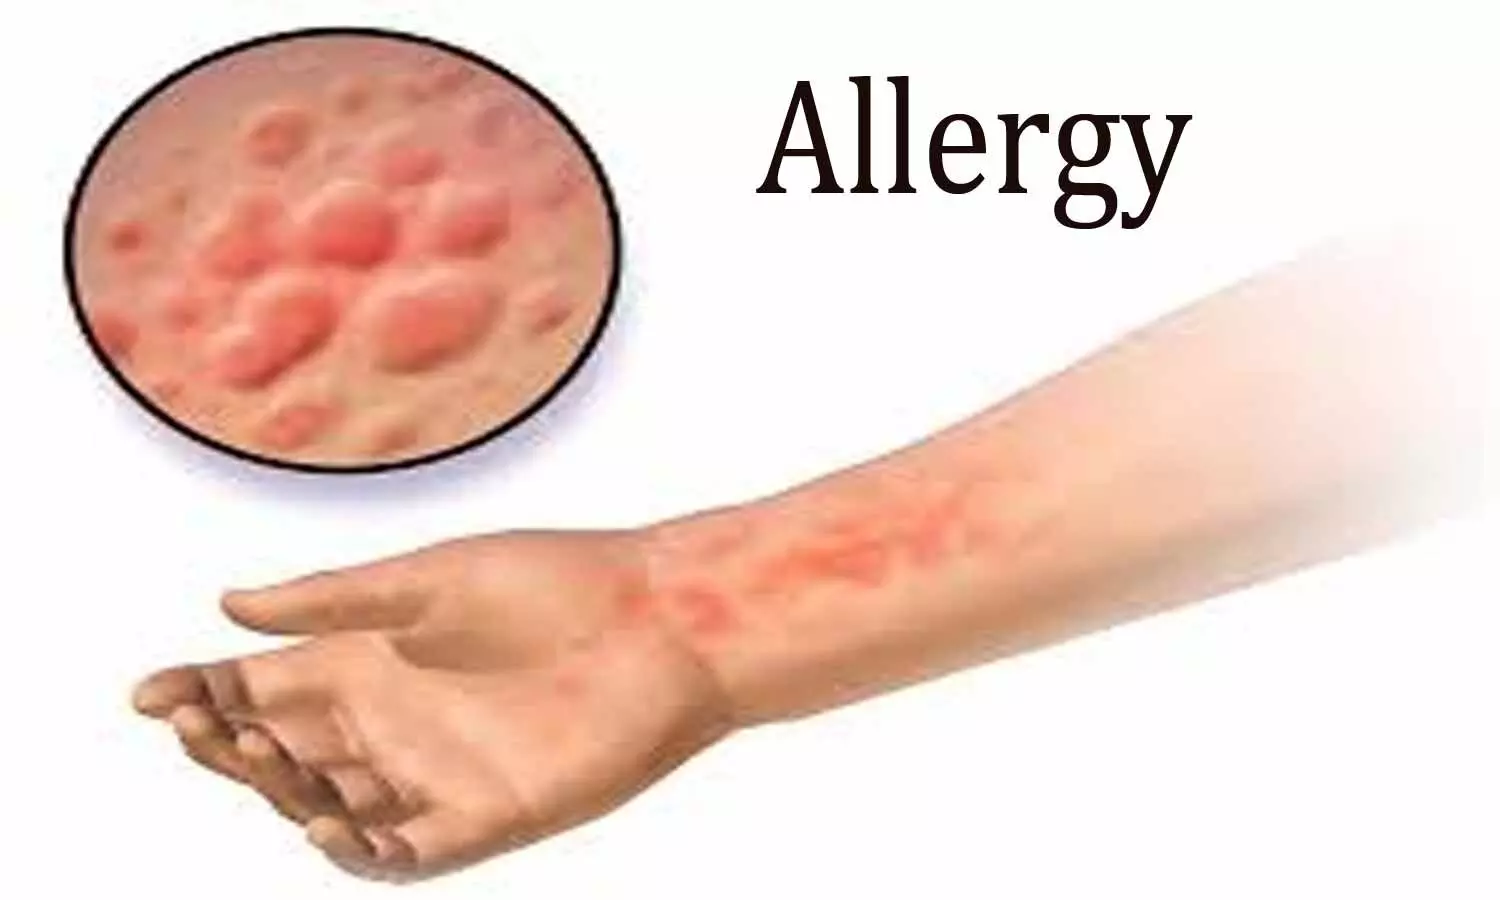 Mast cell assay- A novel painless and reliable allergy test